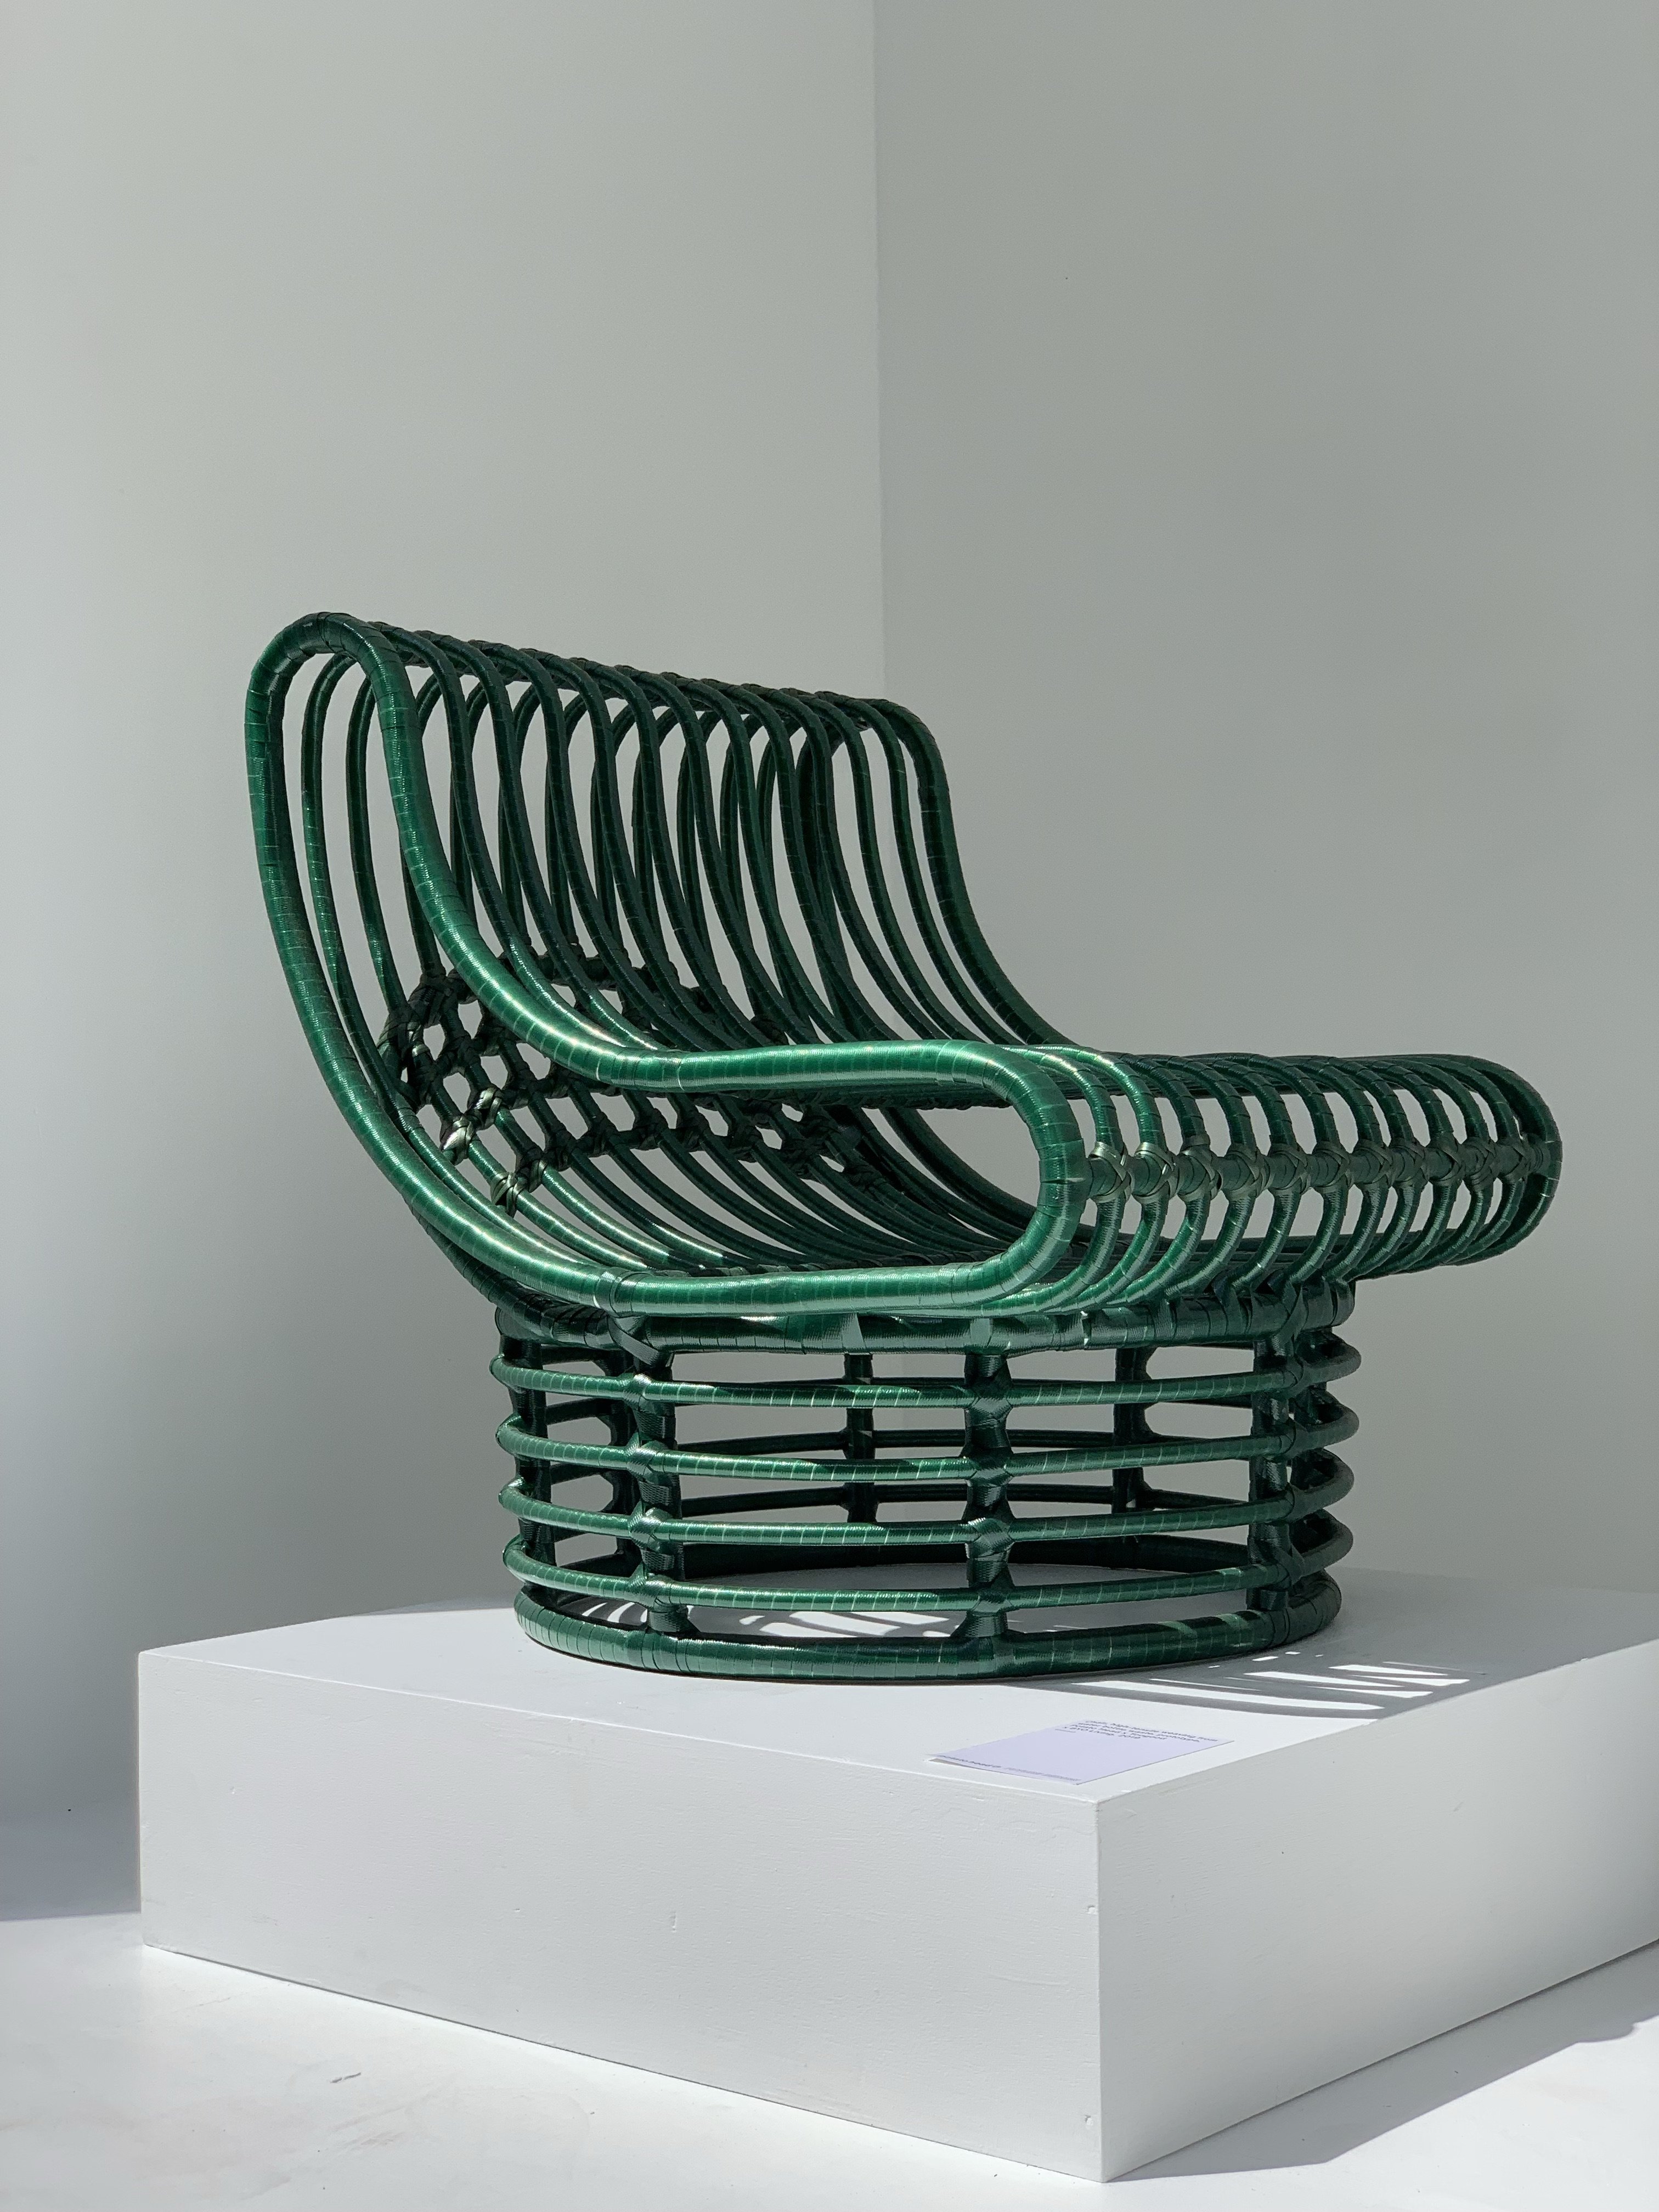 One of the woven green plastic chairs designed by TooGood and BYO Living. The chairs are each made with around 300 plastic bottles.